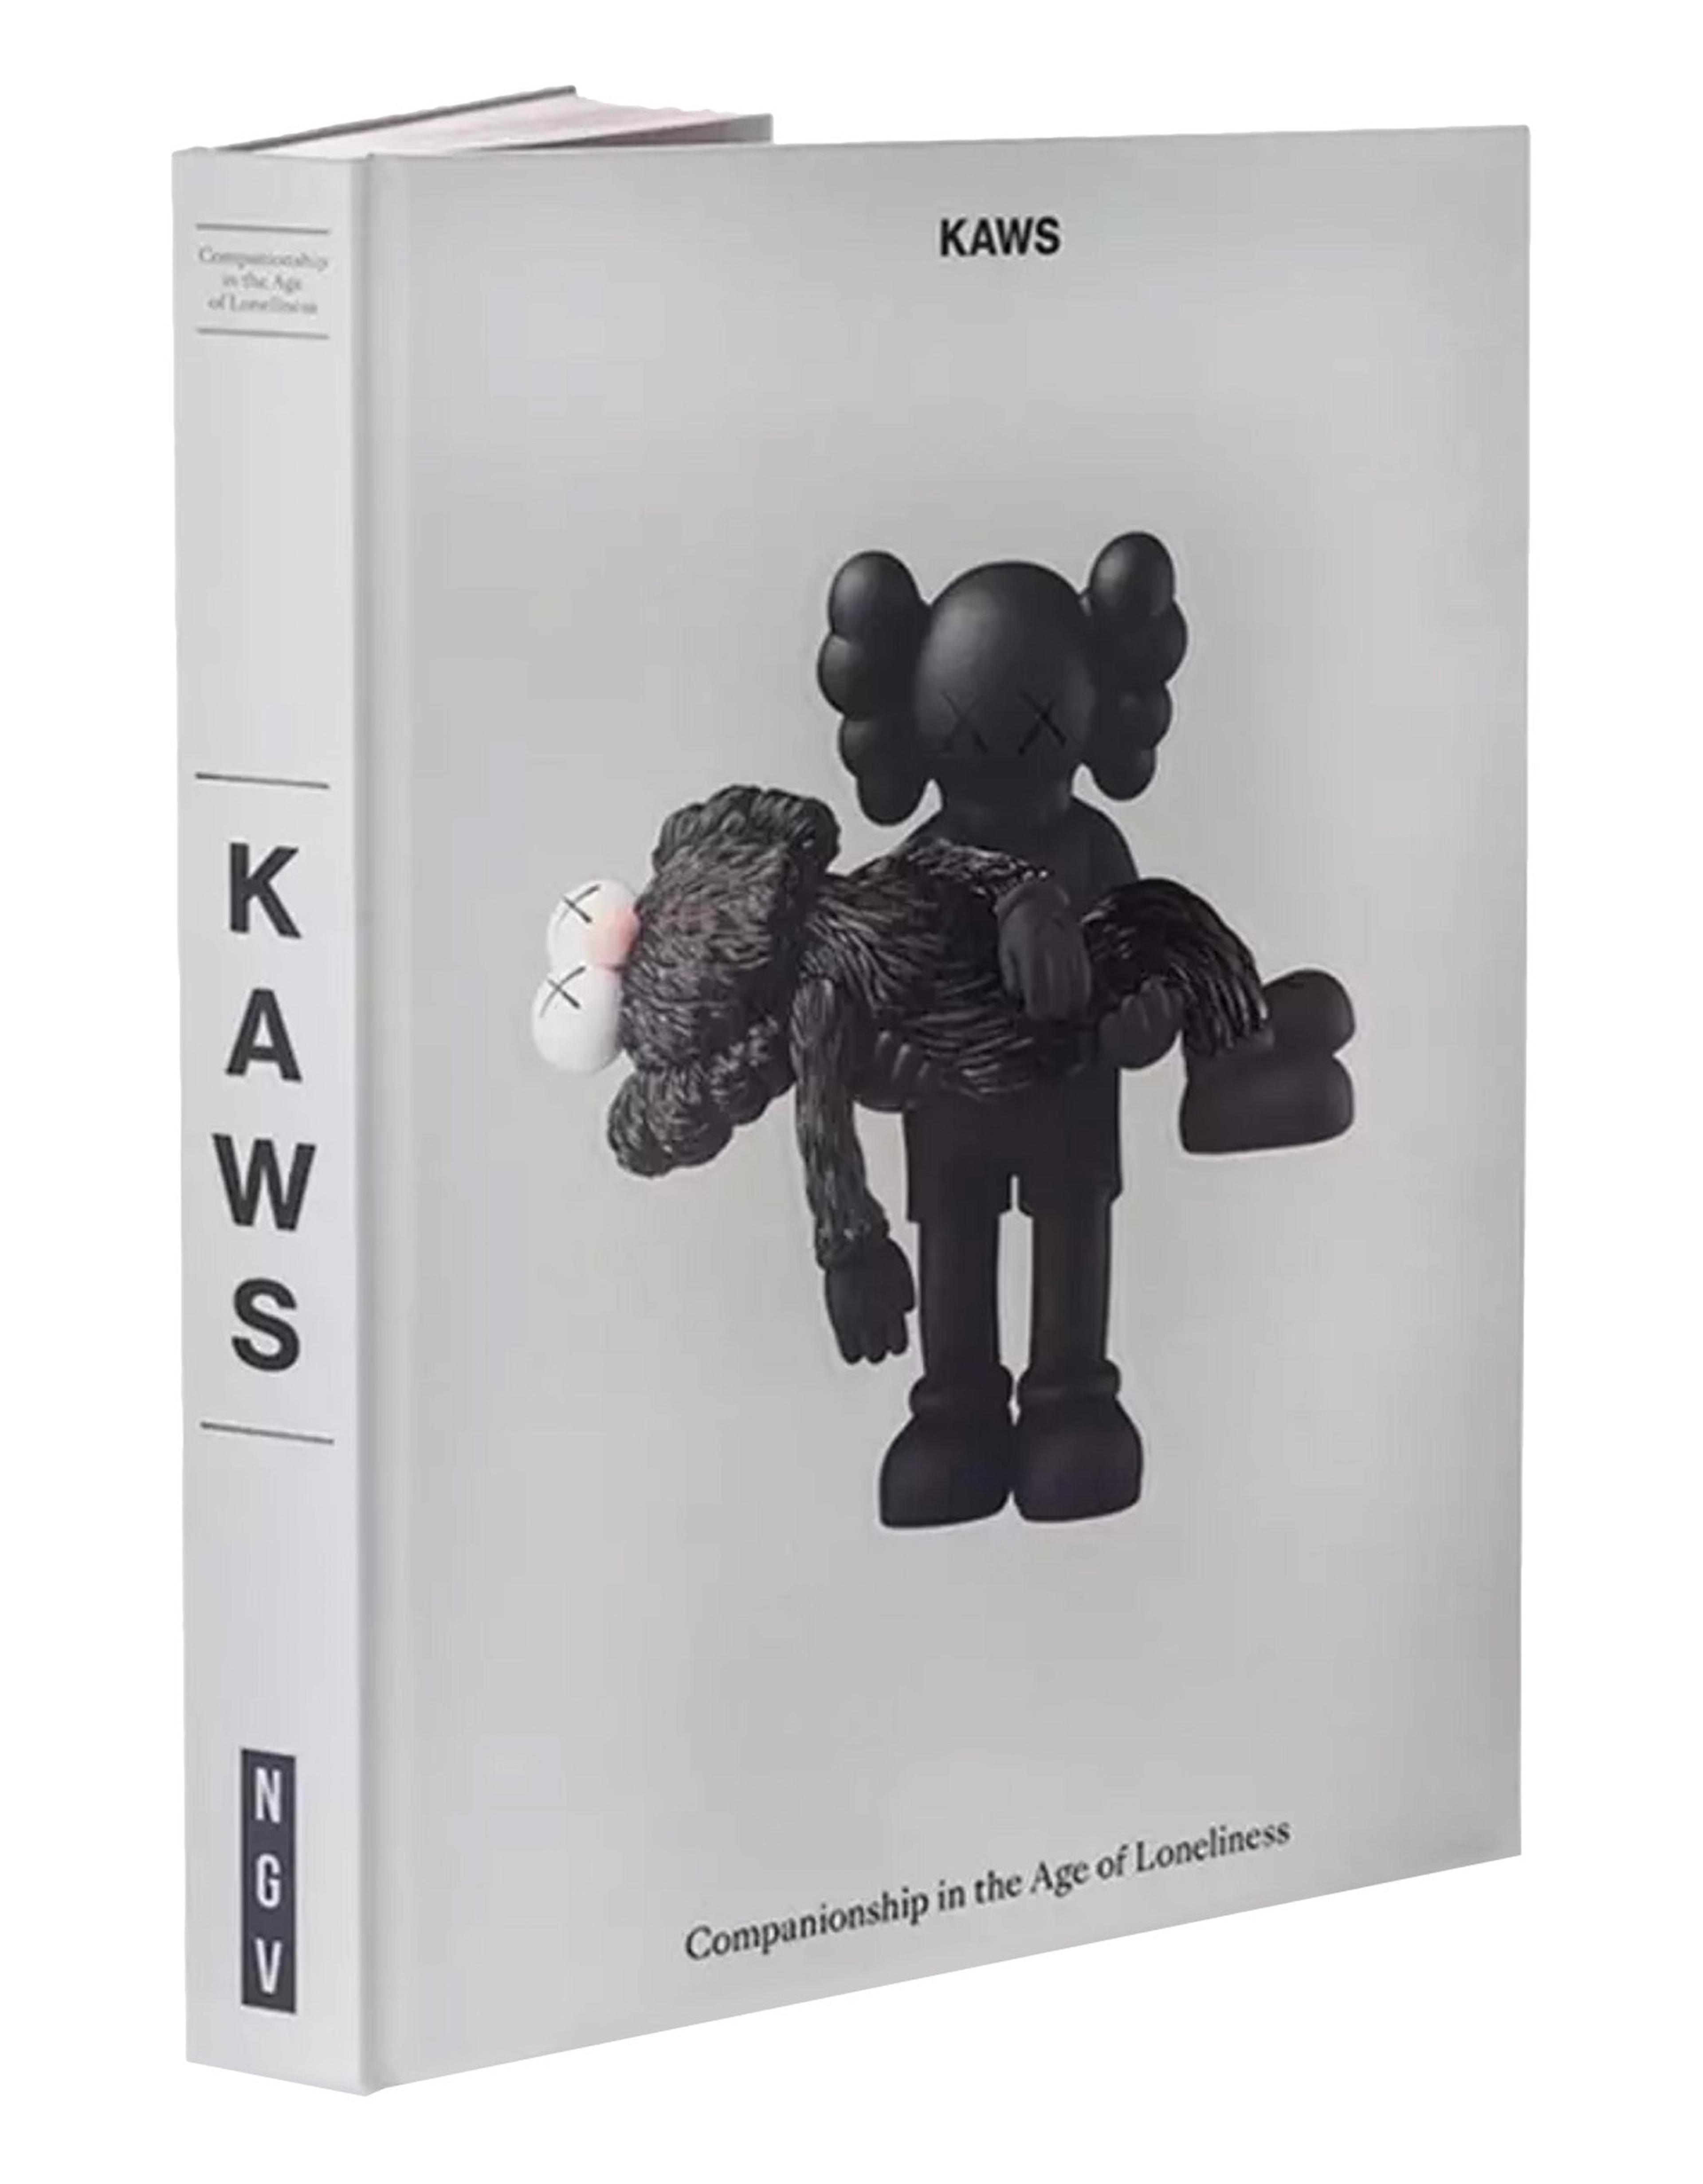 KAWS - Companionship in the Age of Loneliness Hardcover Book